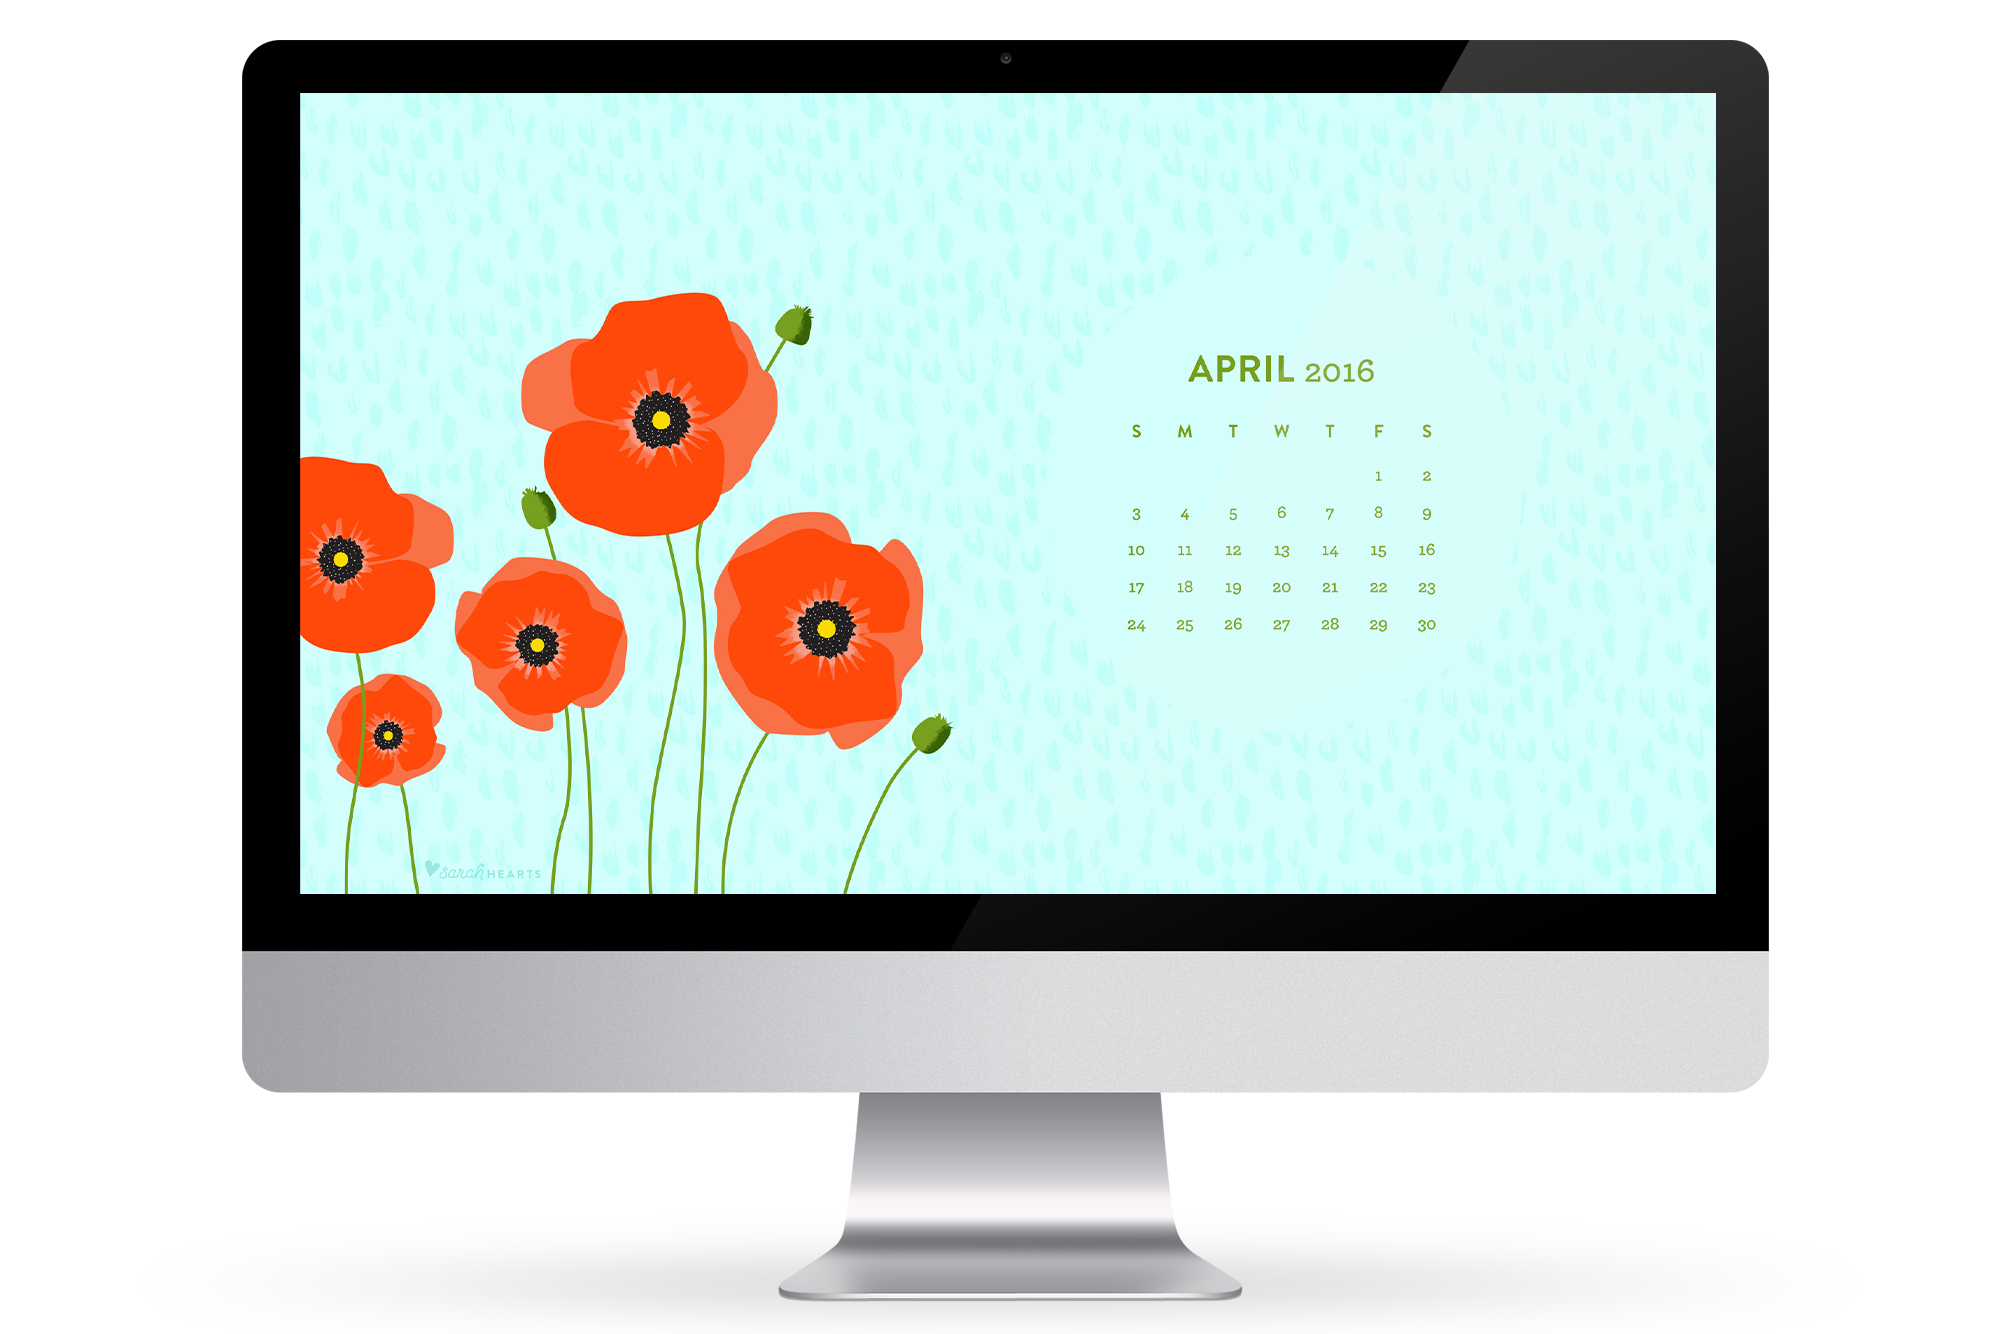  phone or tablet with this free April 2016 calendar wallpaper